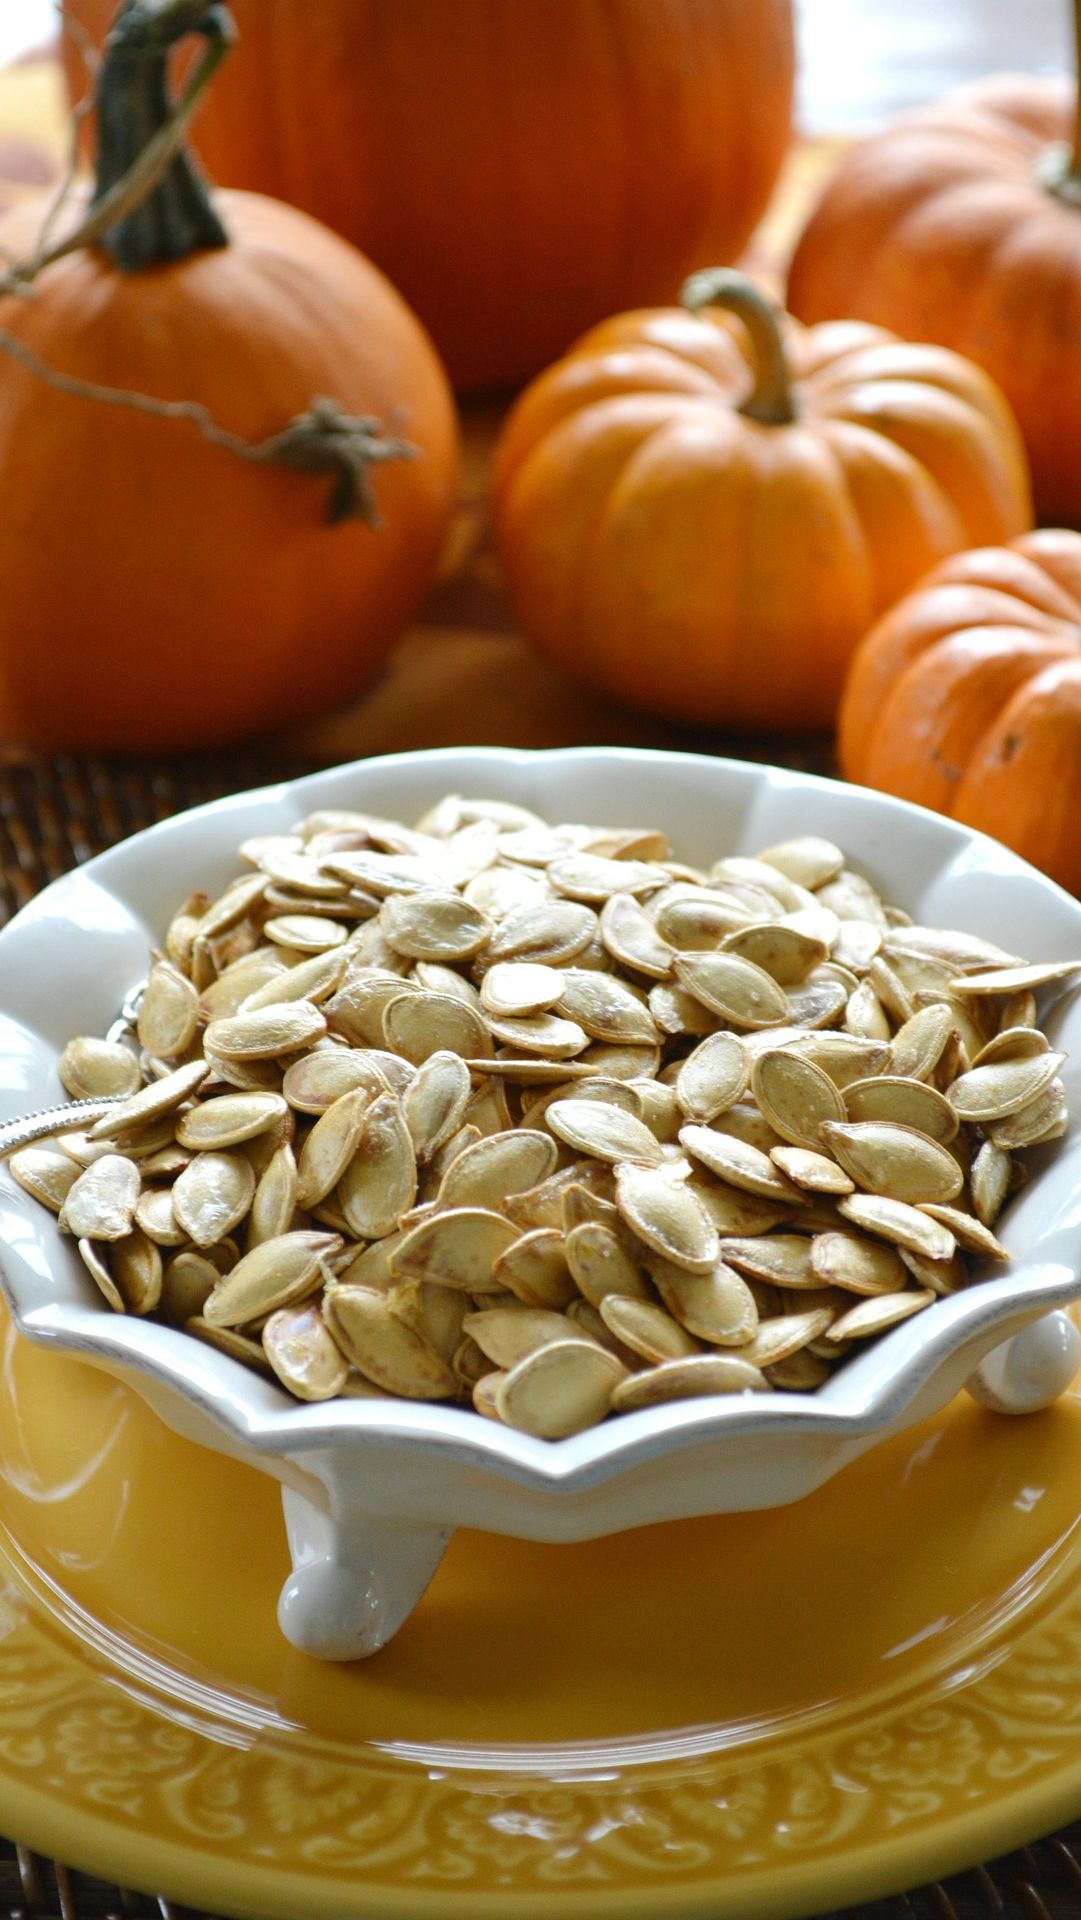 Pumpkin Seed Recipe Ideas With 3 Sweet Variants: Make a Delicious Treat